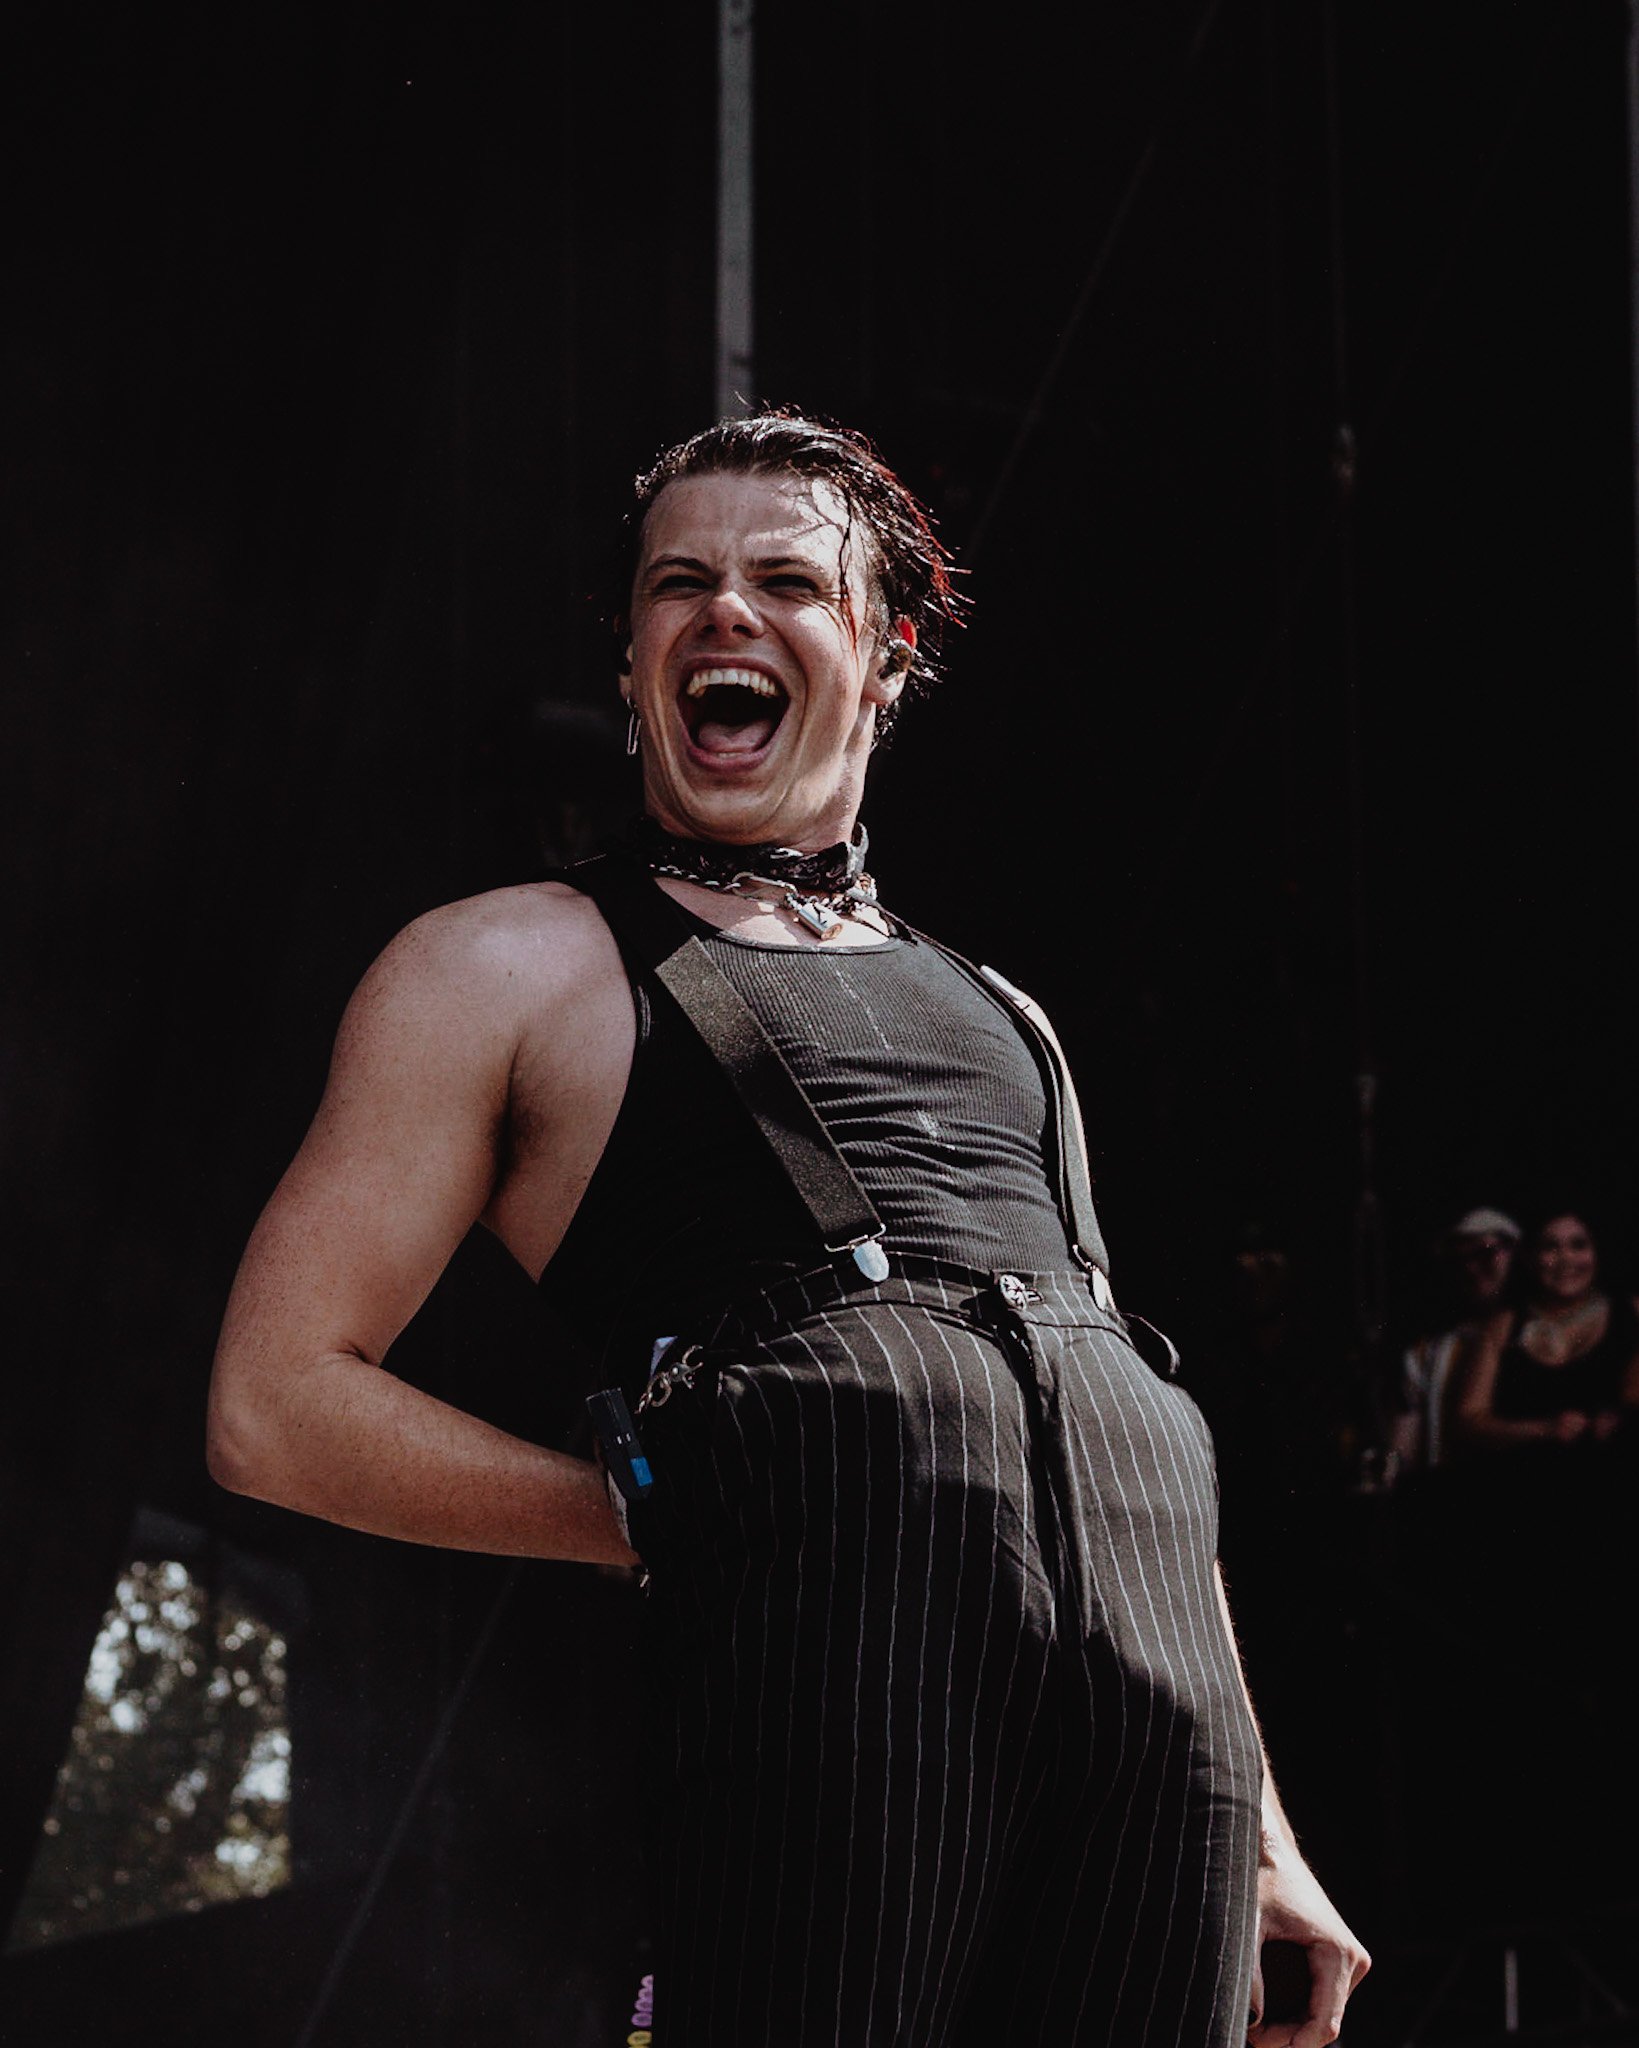  Doncaster native Yungblud kickstarts one of the first sets at the American Express stage for the day with his hit song “parents.” 